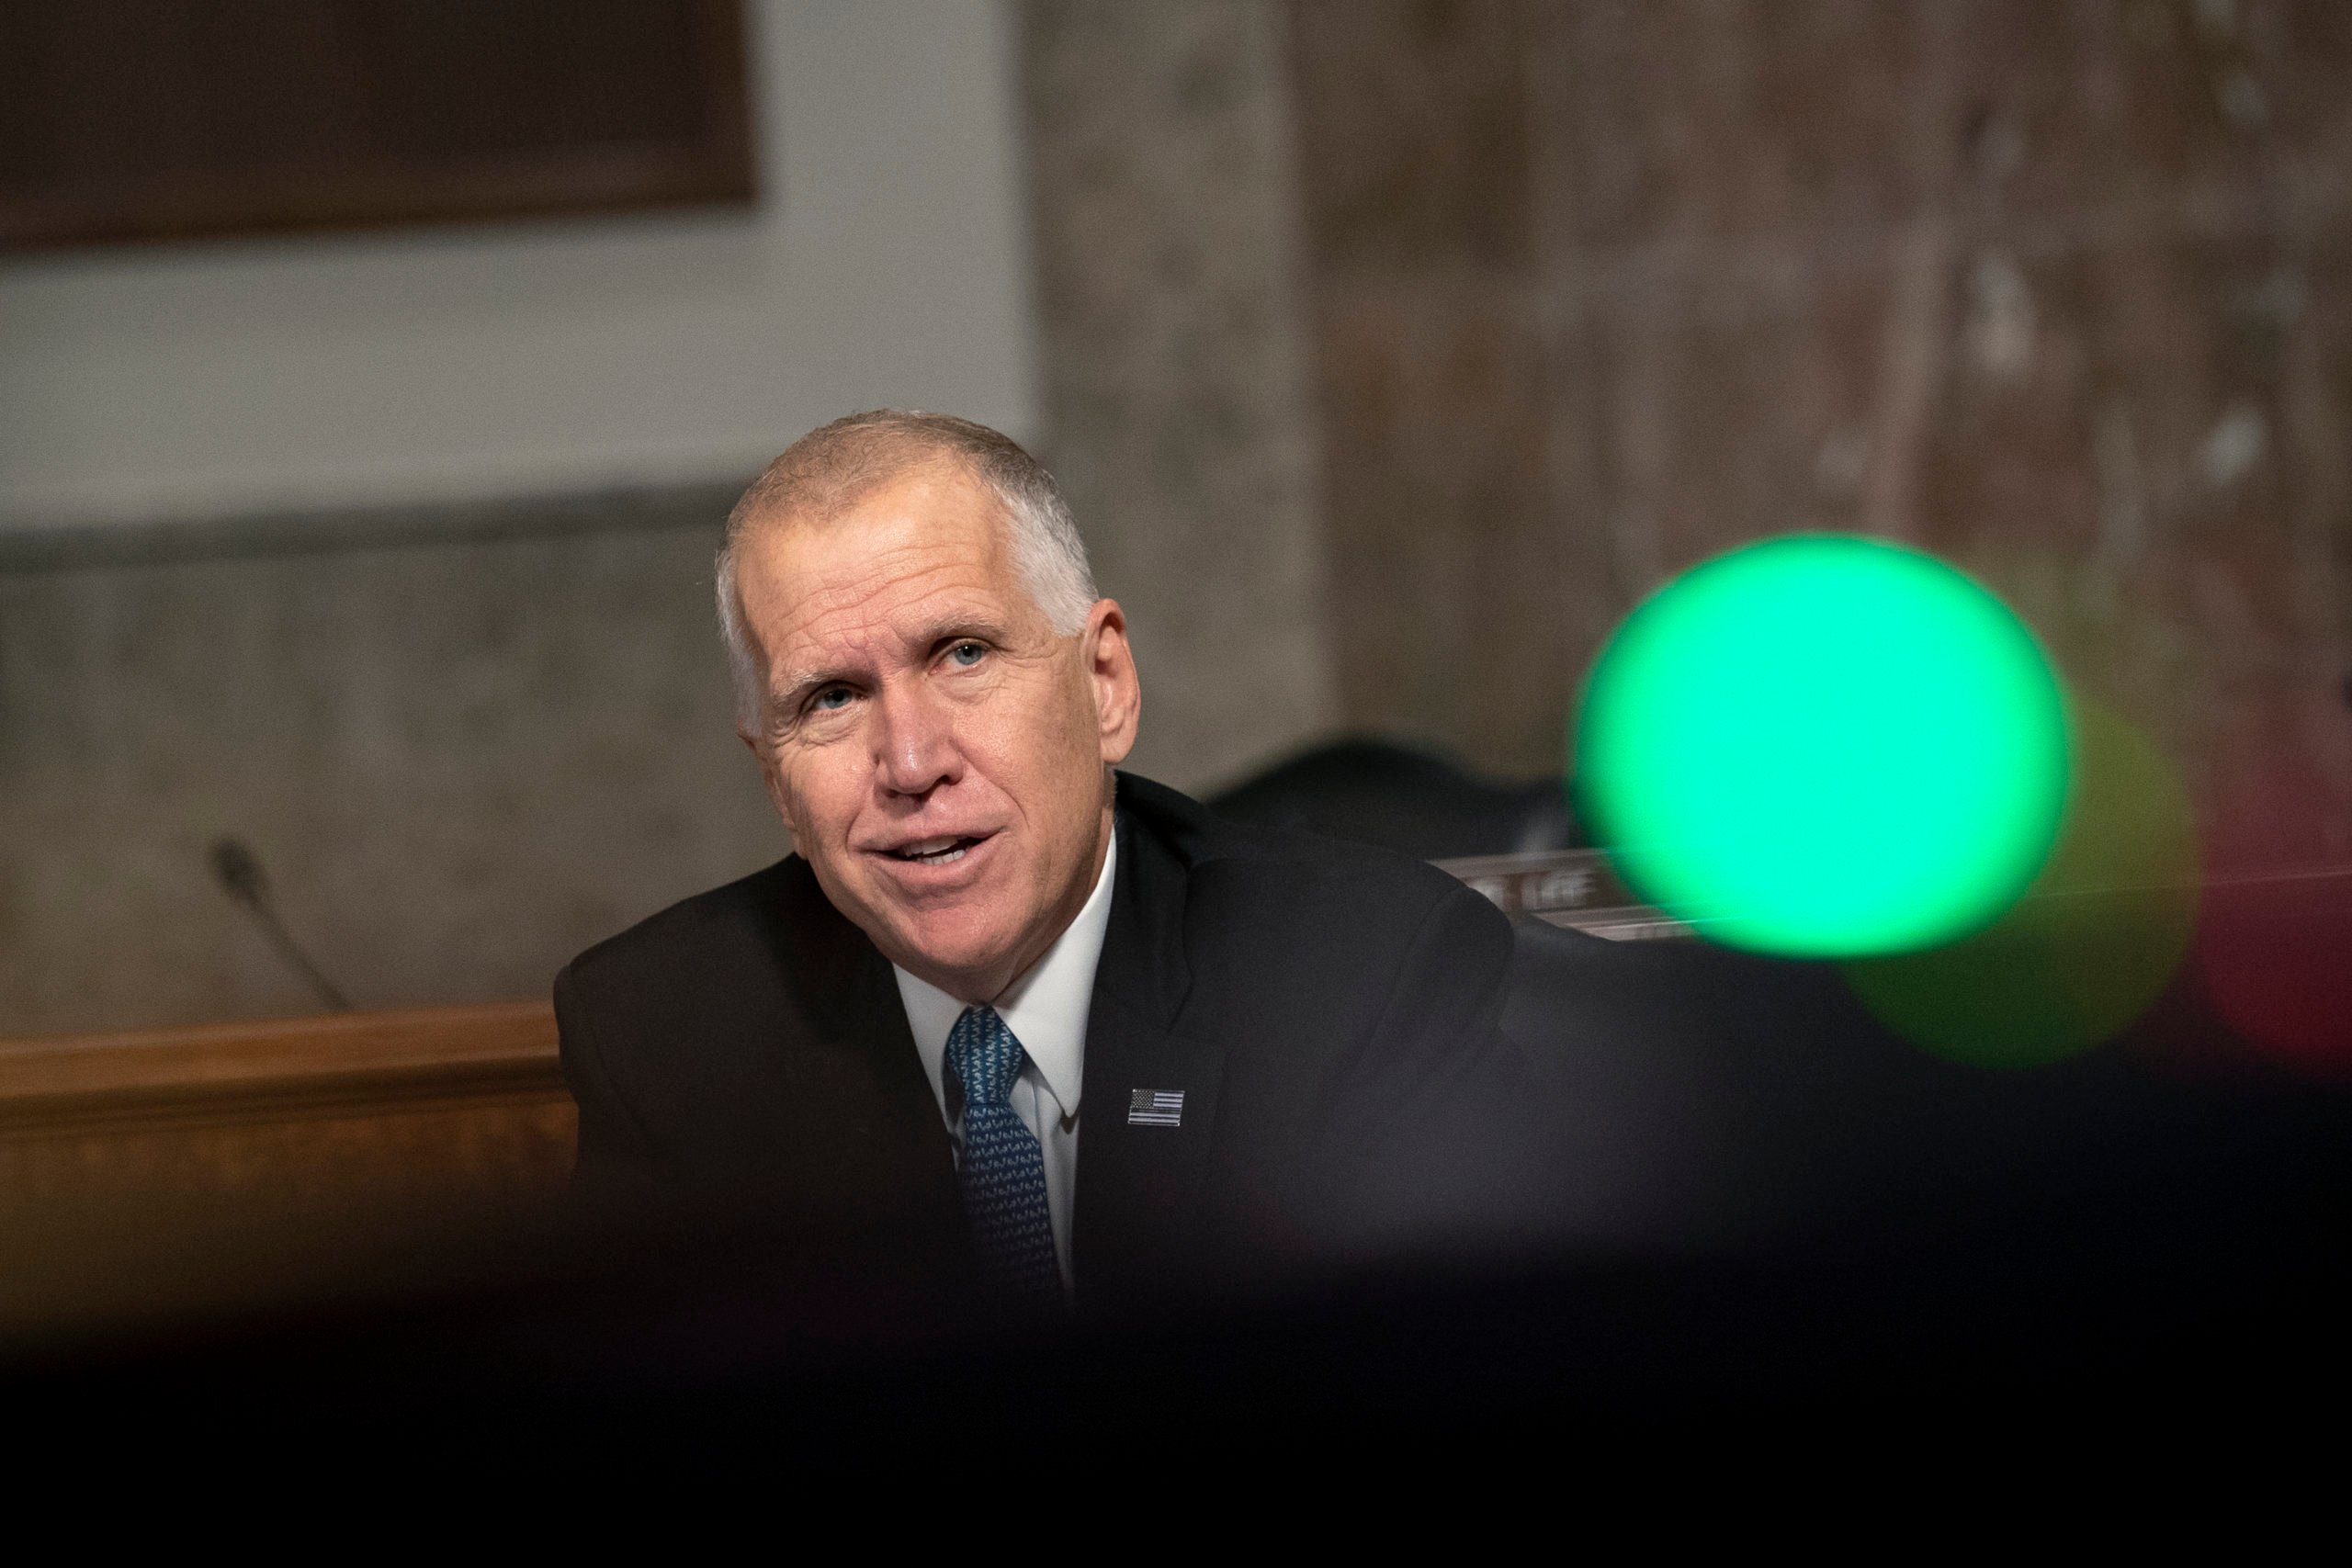 WASHINGTON, DC - SEPTEMBER 30: Sen. Thom Tillis (R-NC) speaks during a Senate Judiciary Committee hearing on Wednesday, September 30, 2020 on Capitol Hill in Washington, DC. The committee is exploring the FBI's investigation of the 2016 Trump campaign and Russian election interference. (Photo by Stefani Reynolds-Pool/Getty Images)